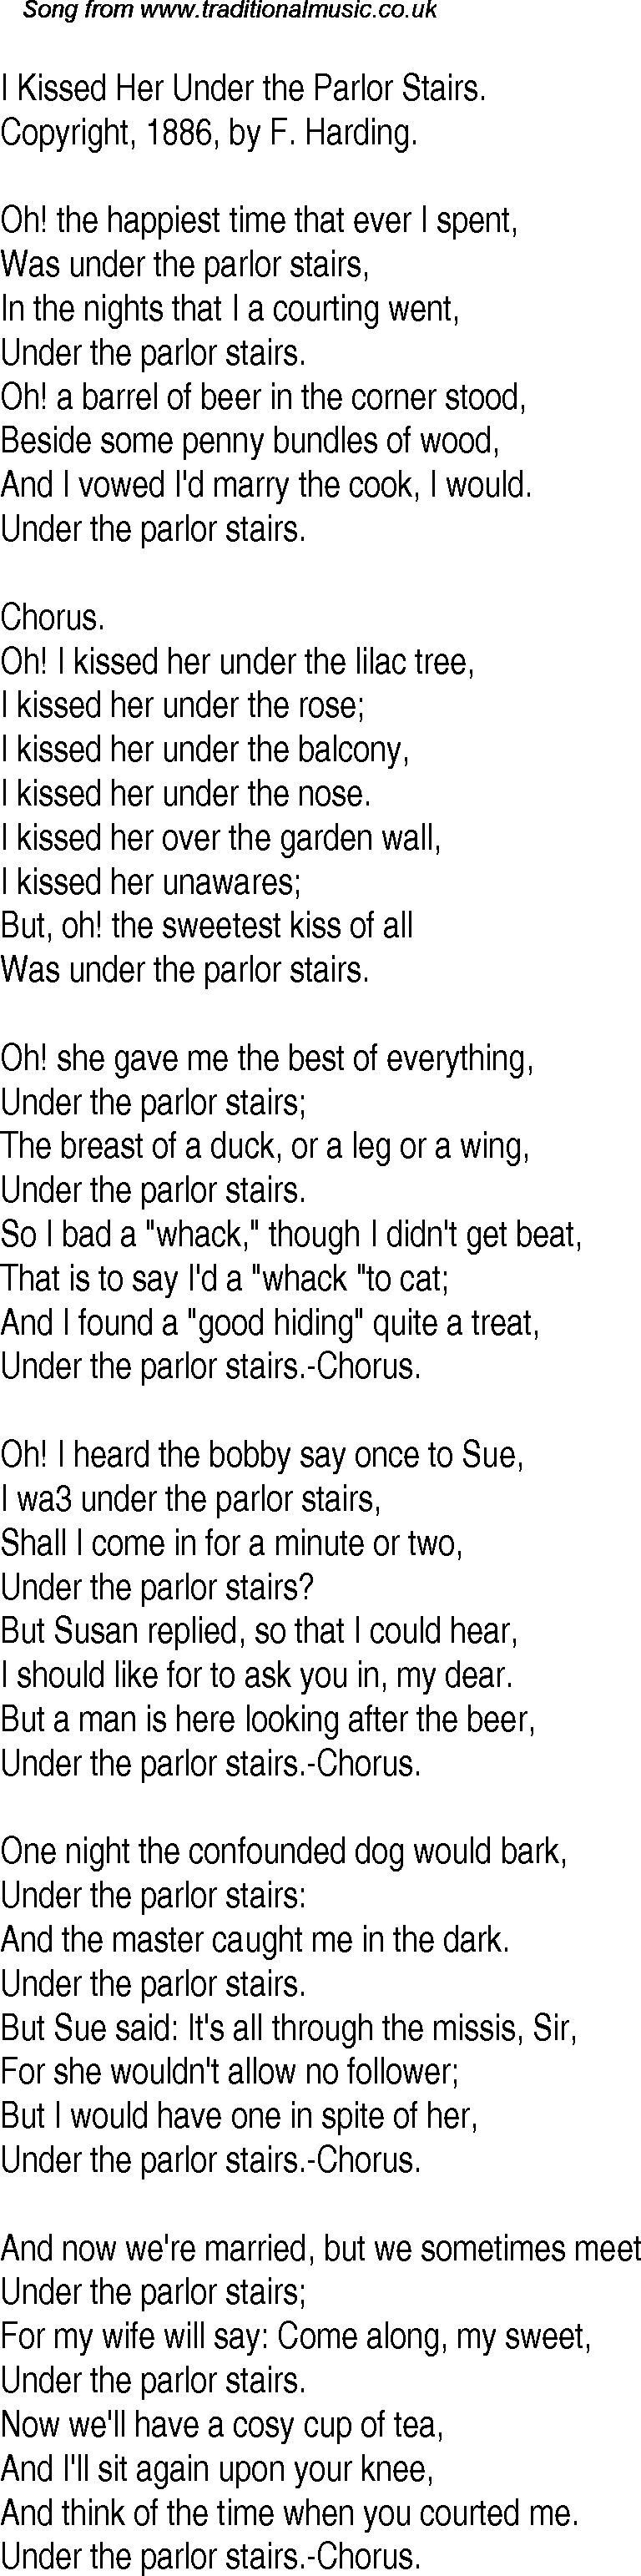 Old Time Song Lyrics For 14 I Kissed Her Under The Parlor Stairs